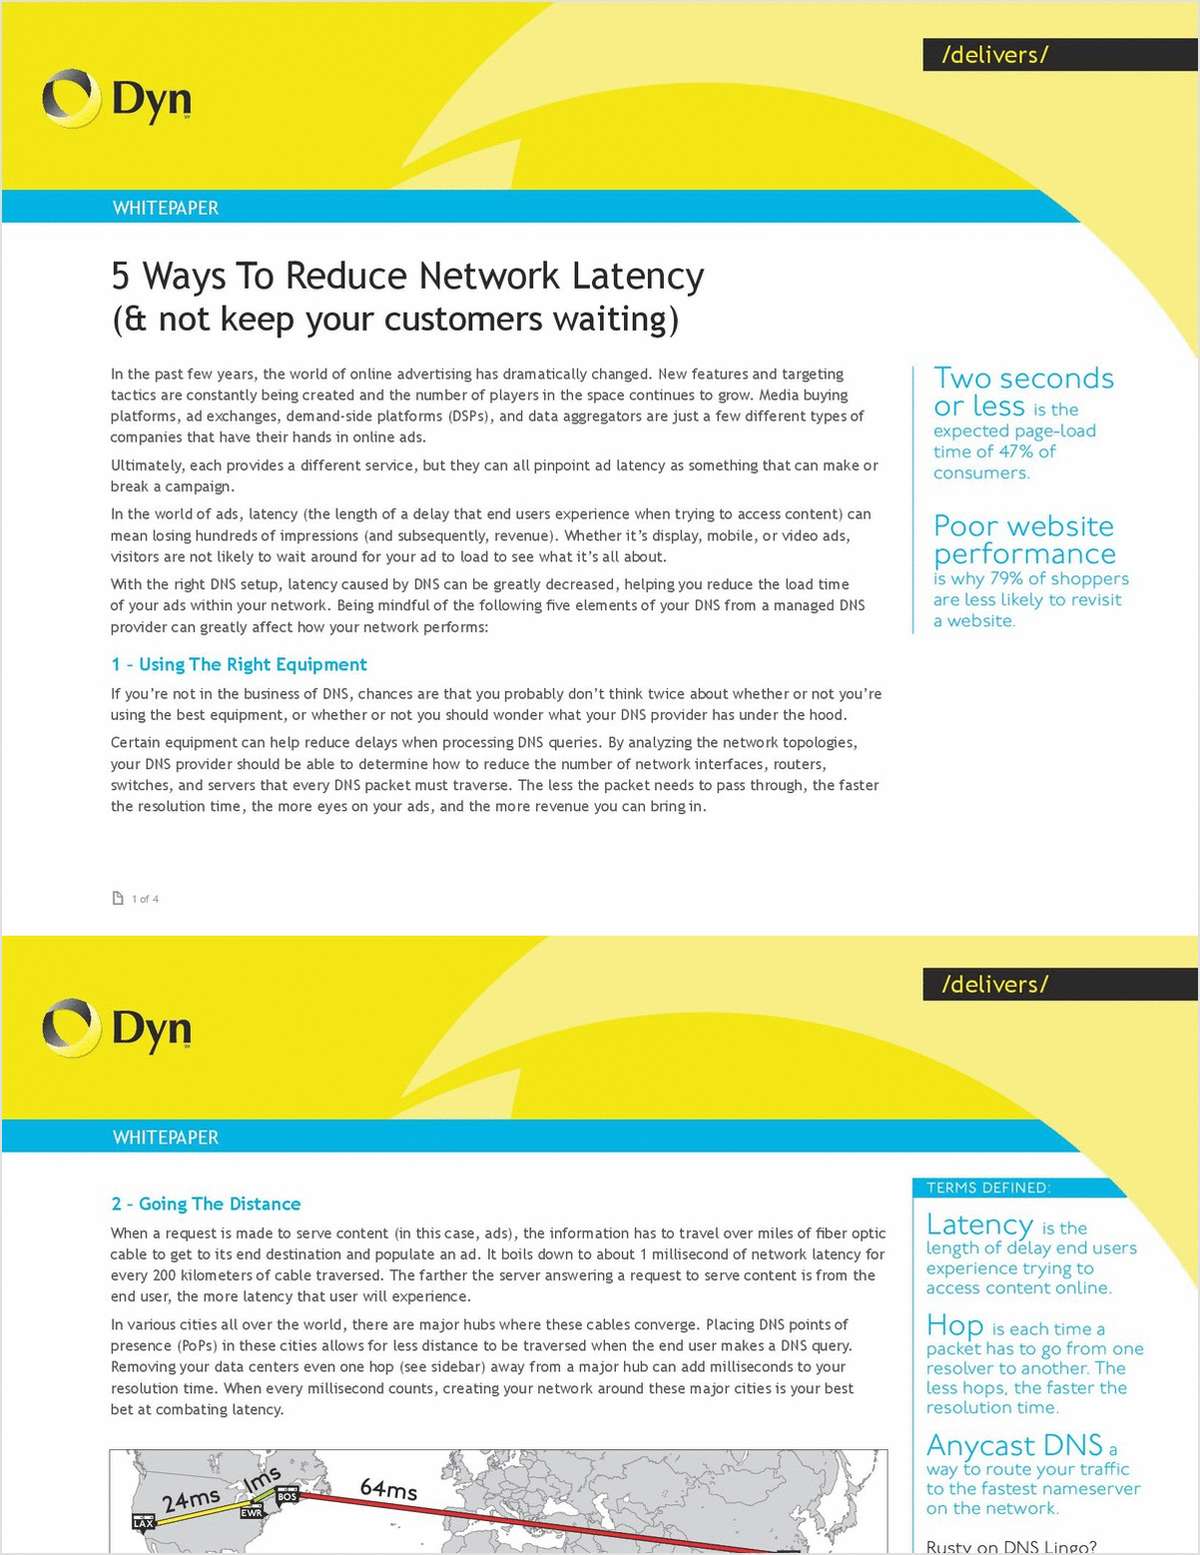 5 Ways to Reduce Advertising Network Latency (and not keep your customers waiting)